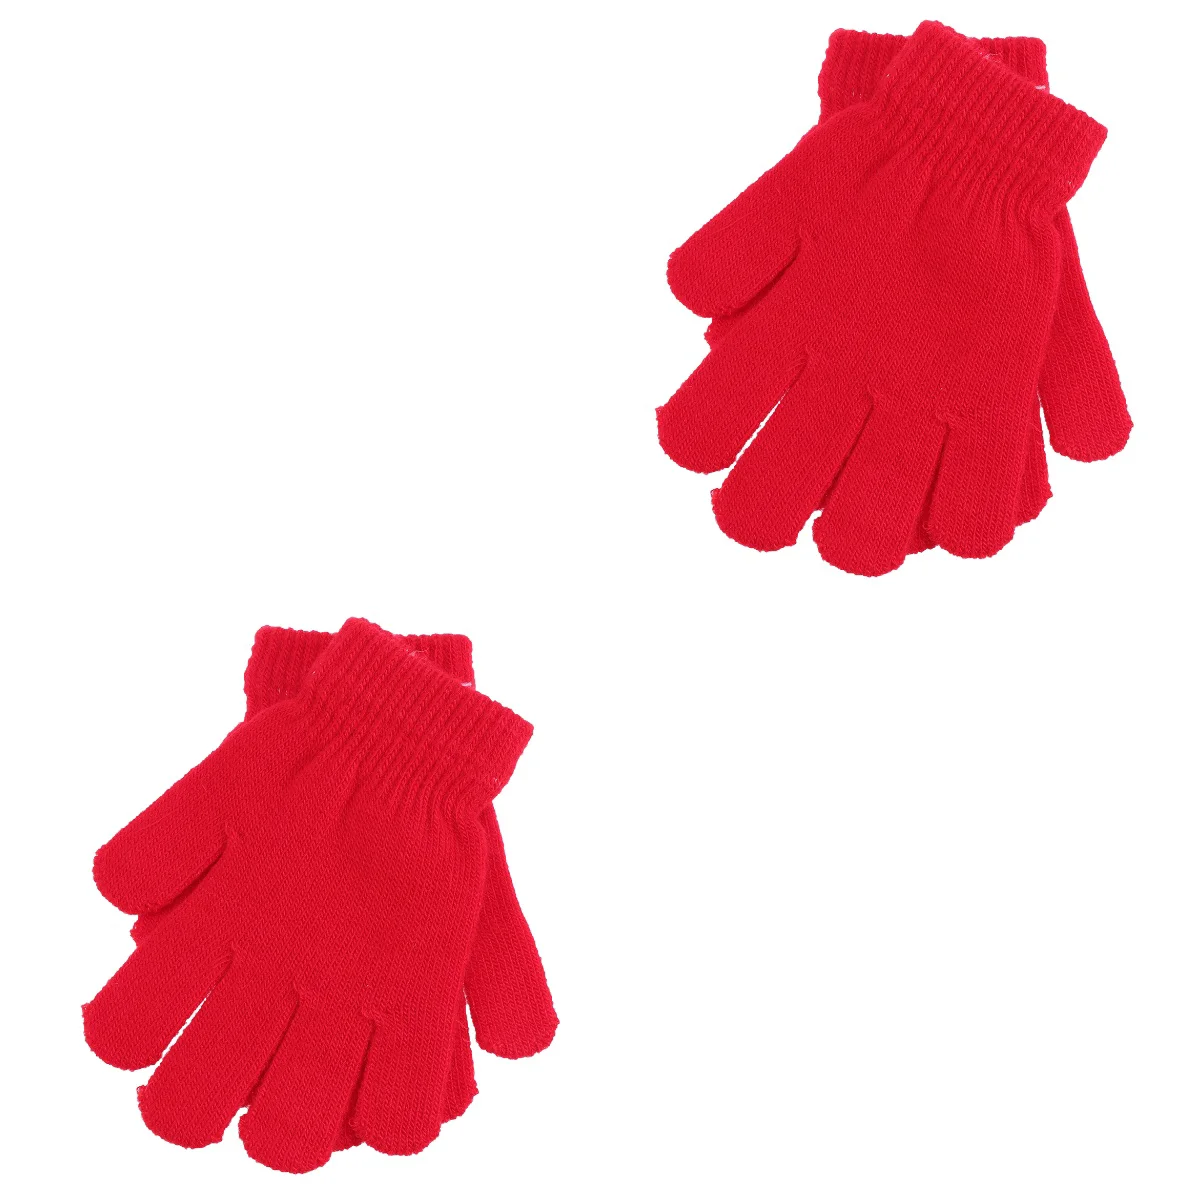 2pcs Children's Gloves Autumn and Winter Models Knitted Solid Color Five Fingers Warm Gloves 4-12 Years Old (Red) children gloves autumn and winter plus velvet thickening warm cartoon dinosaur 0 2 years old male and female baby knitted mitten